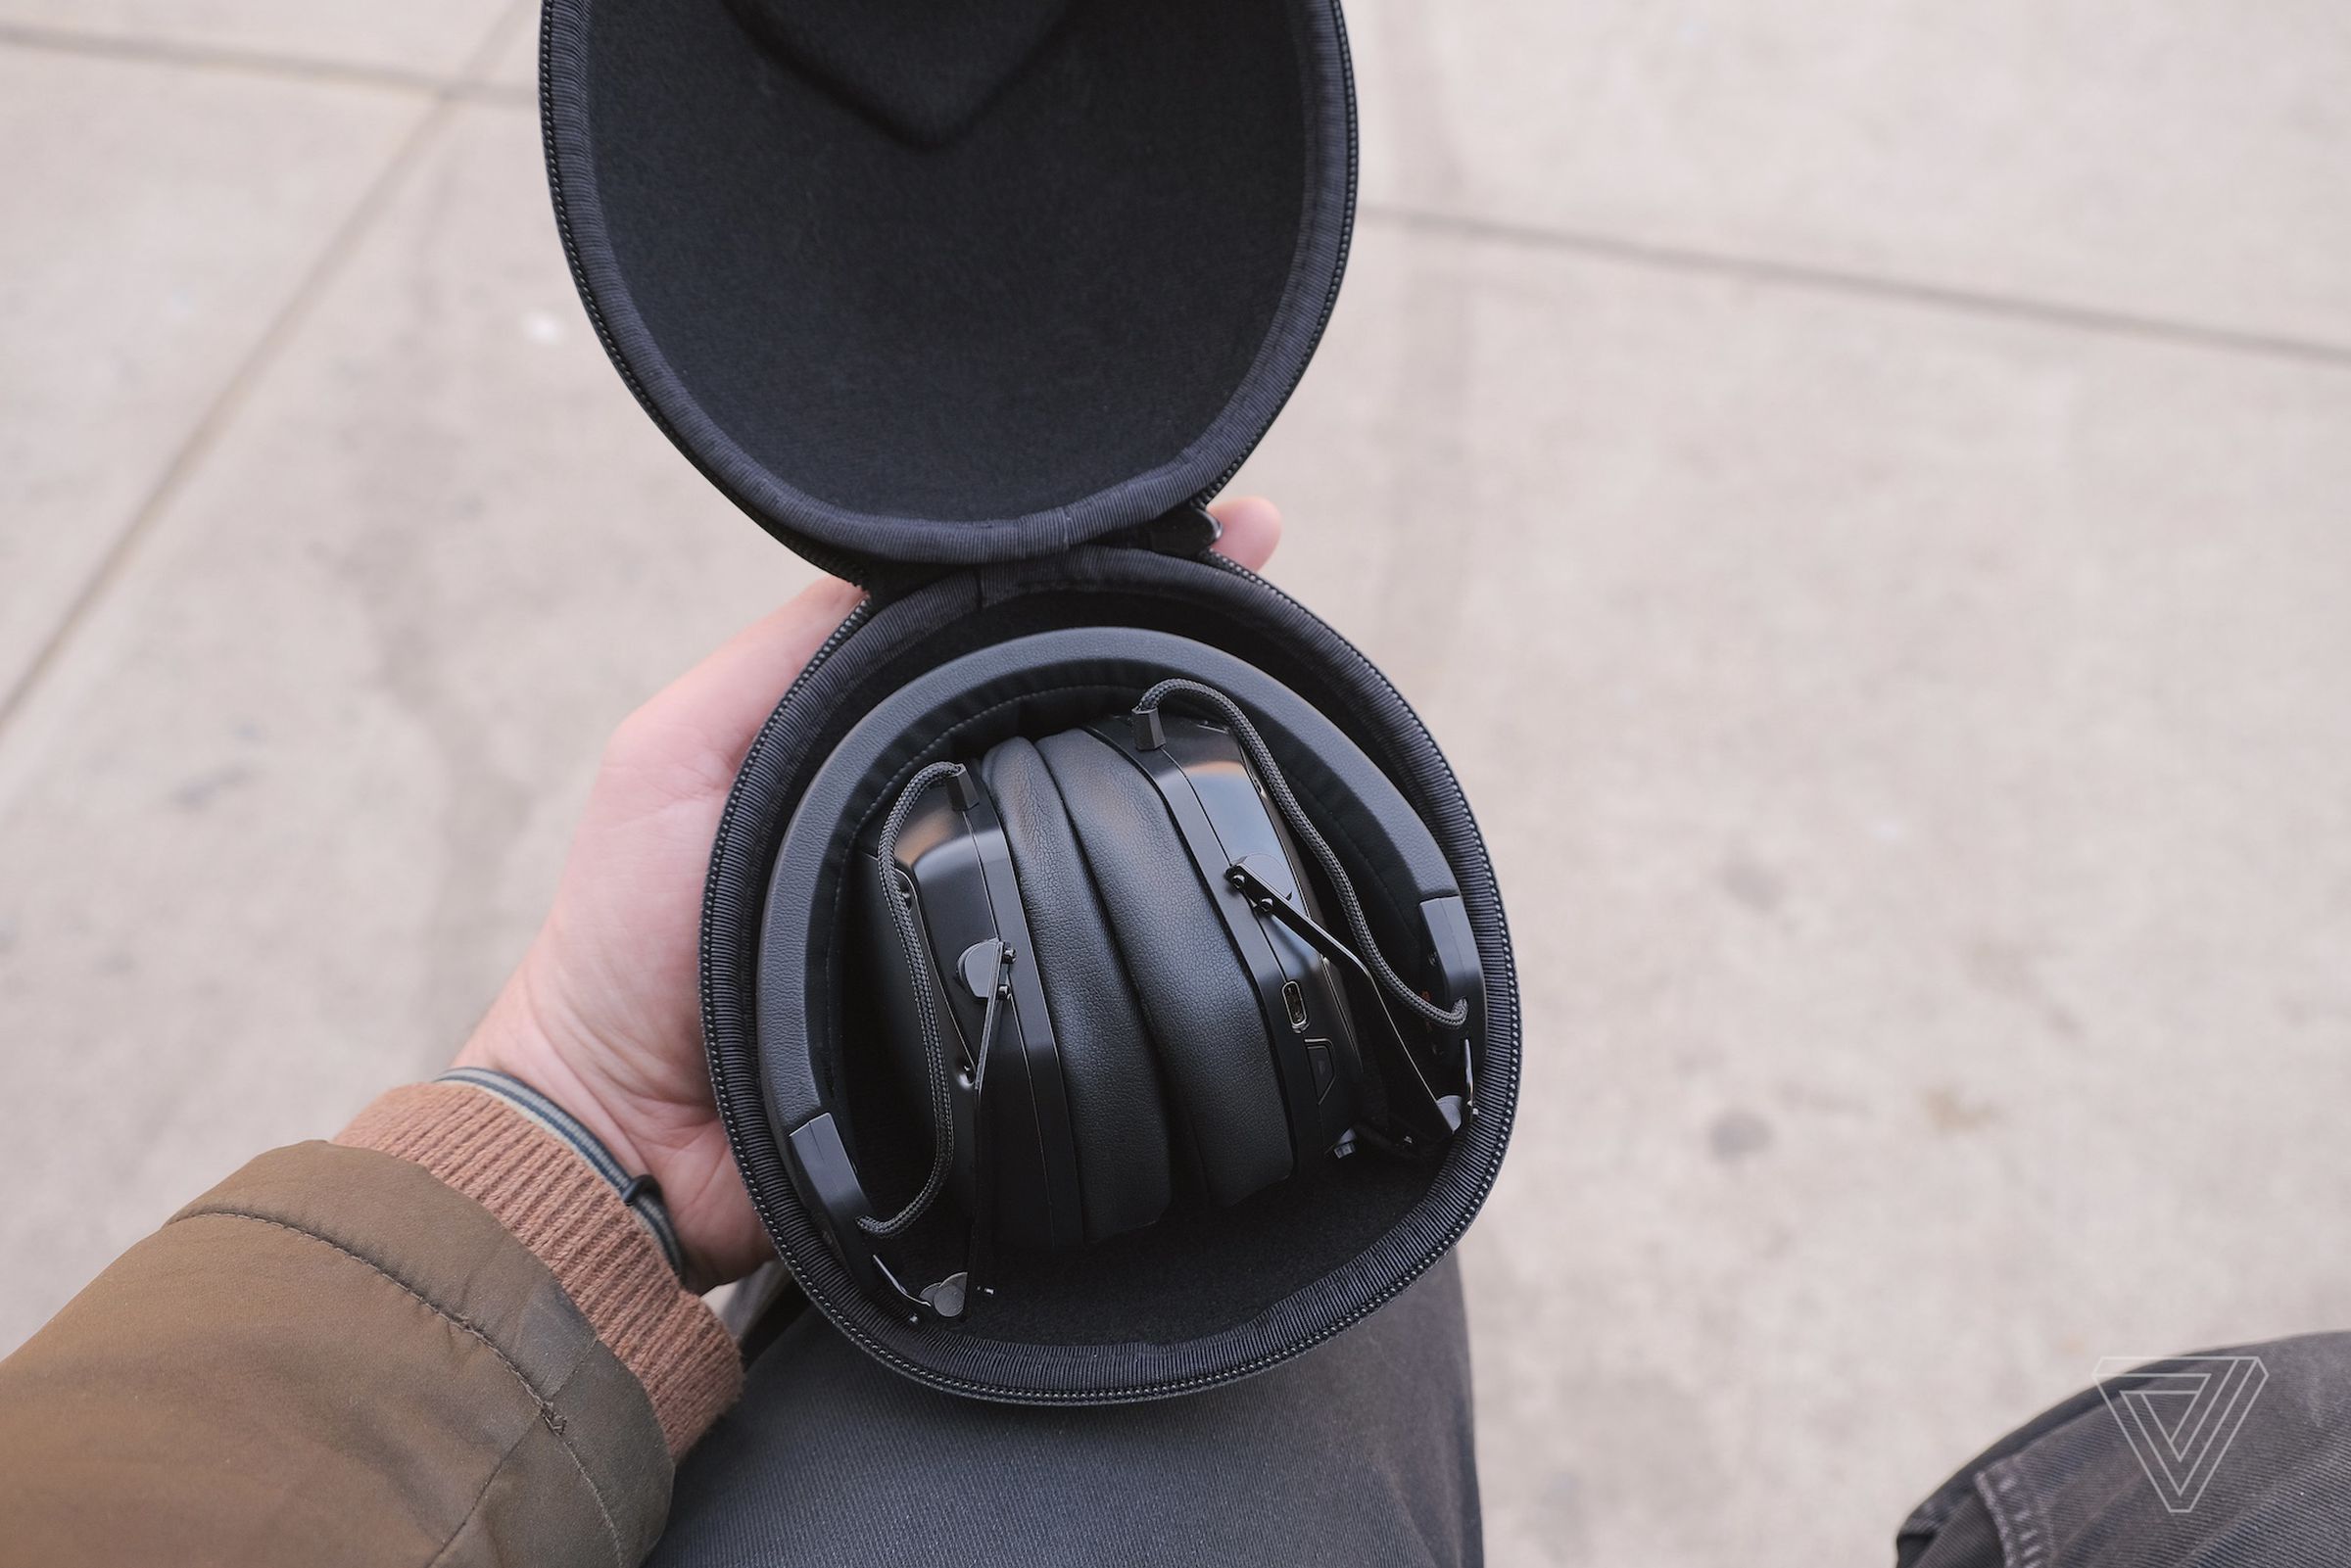 V-Moda might have the best carrying case around.